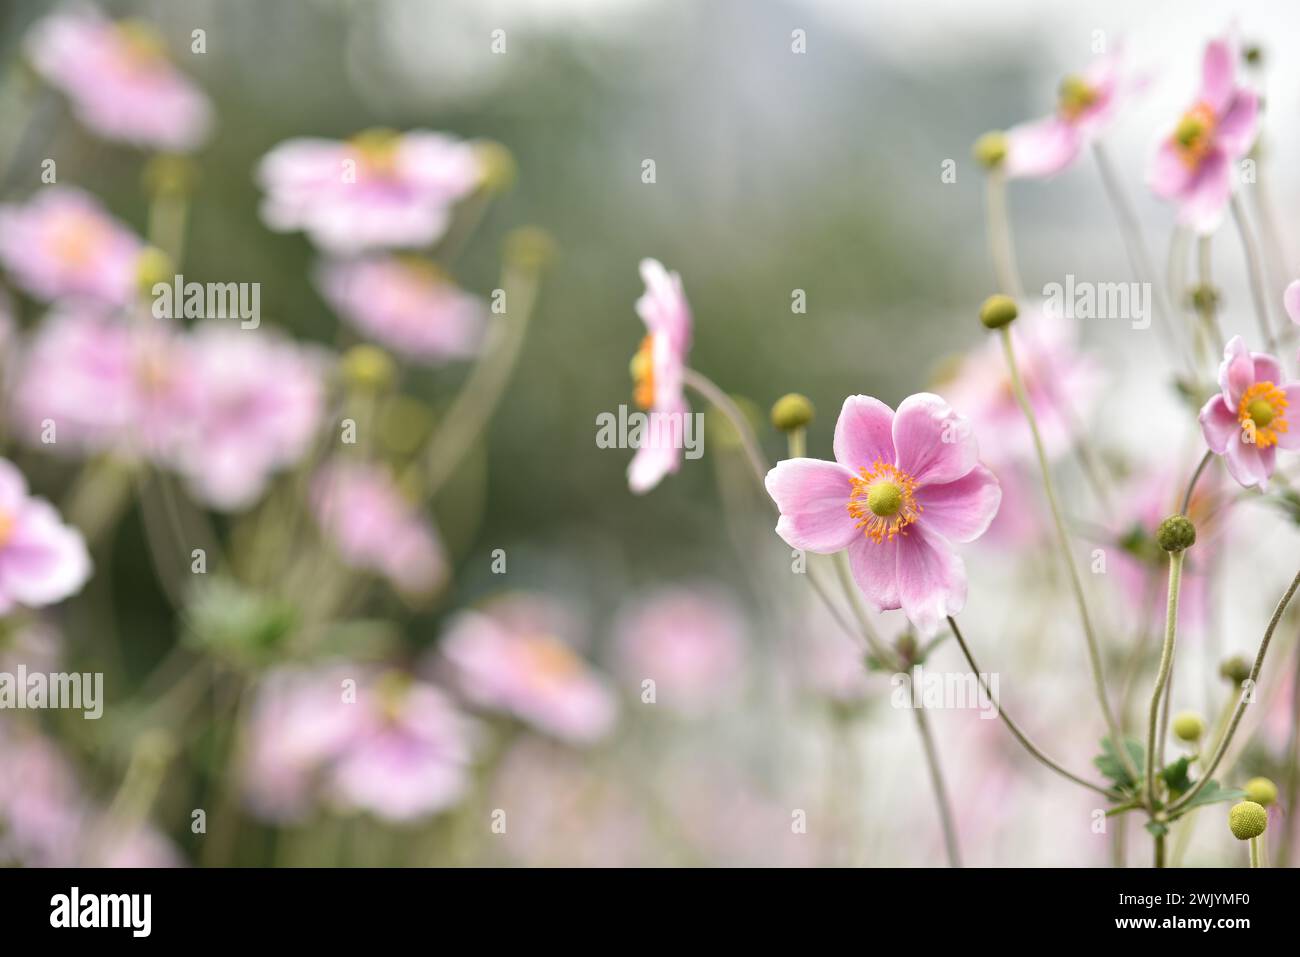 Japanese anemone plant, or thimbleweed, blooms with saucer-shaped flowers. Floral wall art or background. Stock Photo